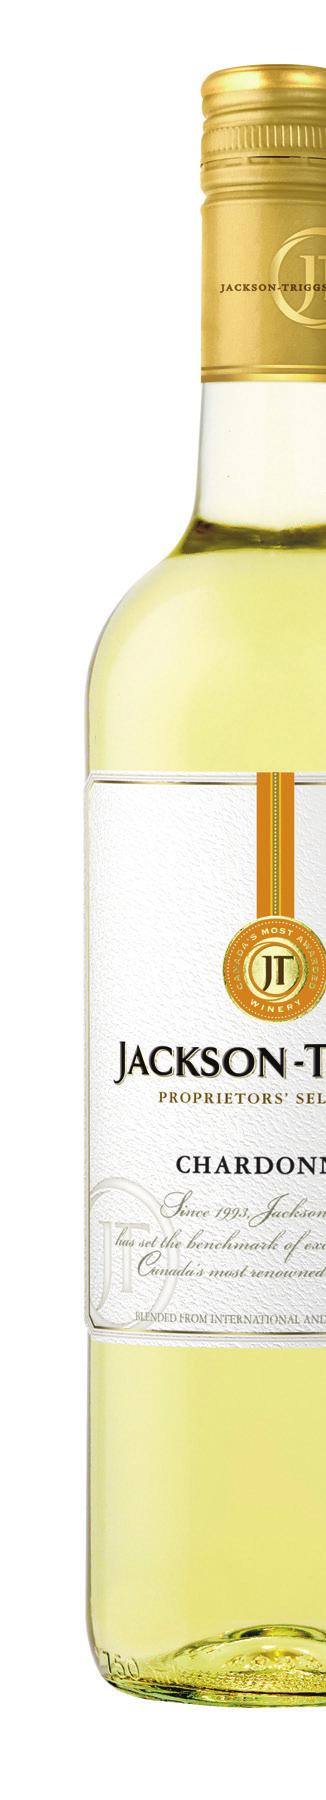 White Wine CHARDONNAY Jackson-Triggs Proprietors Selection, BC Intense aromas of ripe apples and pears followed by a hint of oak and butter, this is a dry, full bodied wine. glass $6. 00 ½ L $16.